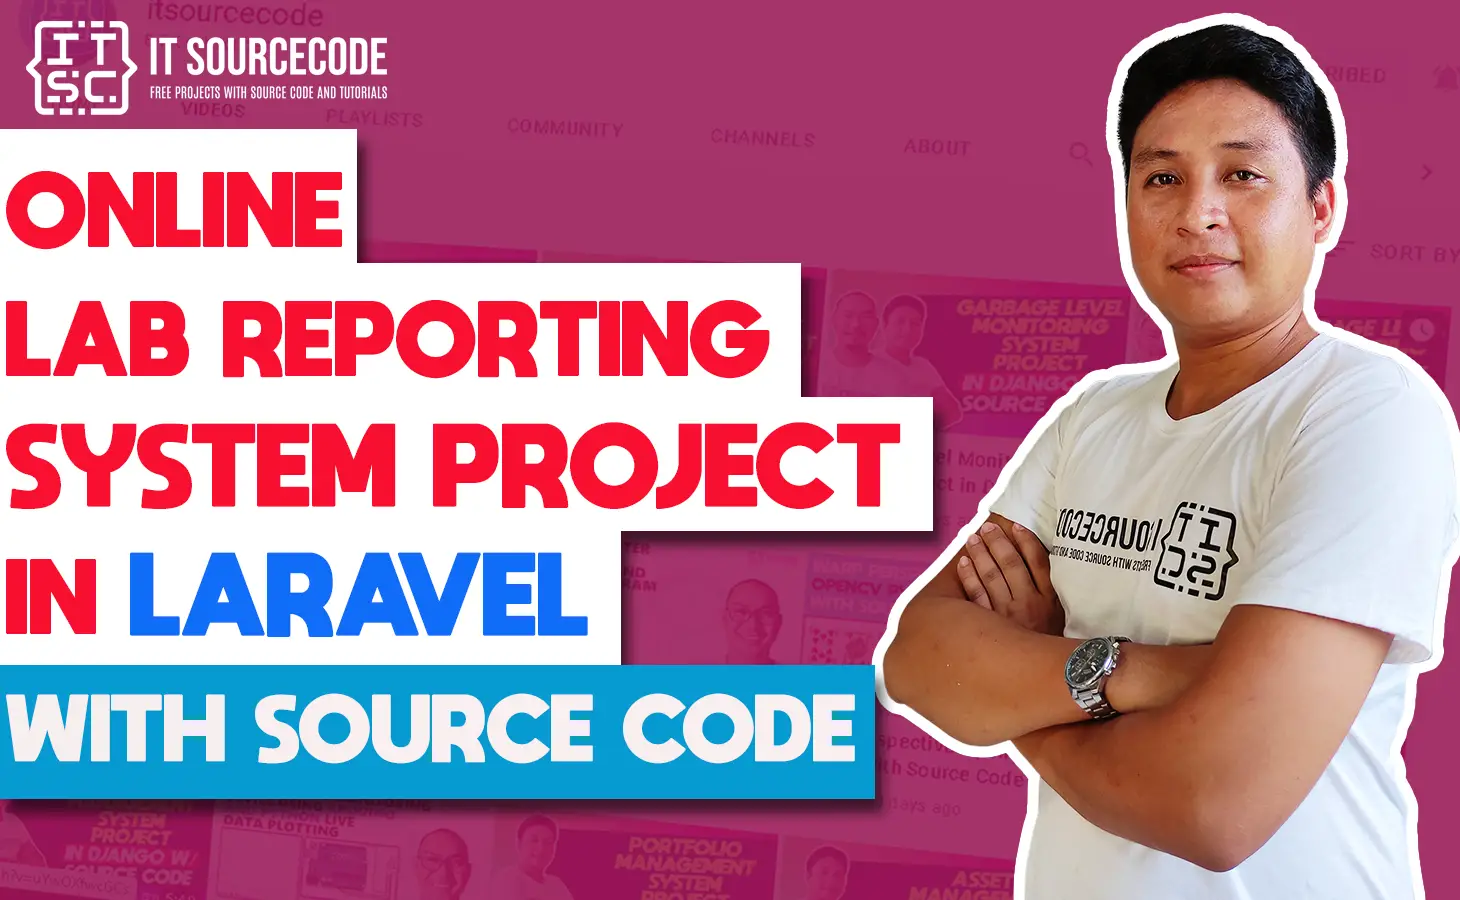 Online Lab Reporting System Project in Laravel with Source Code